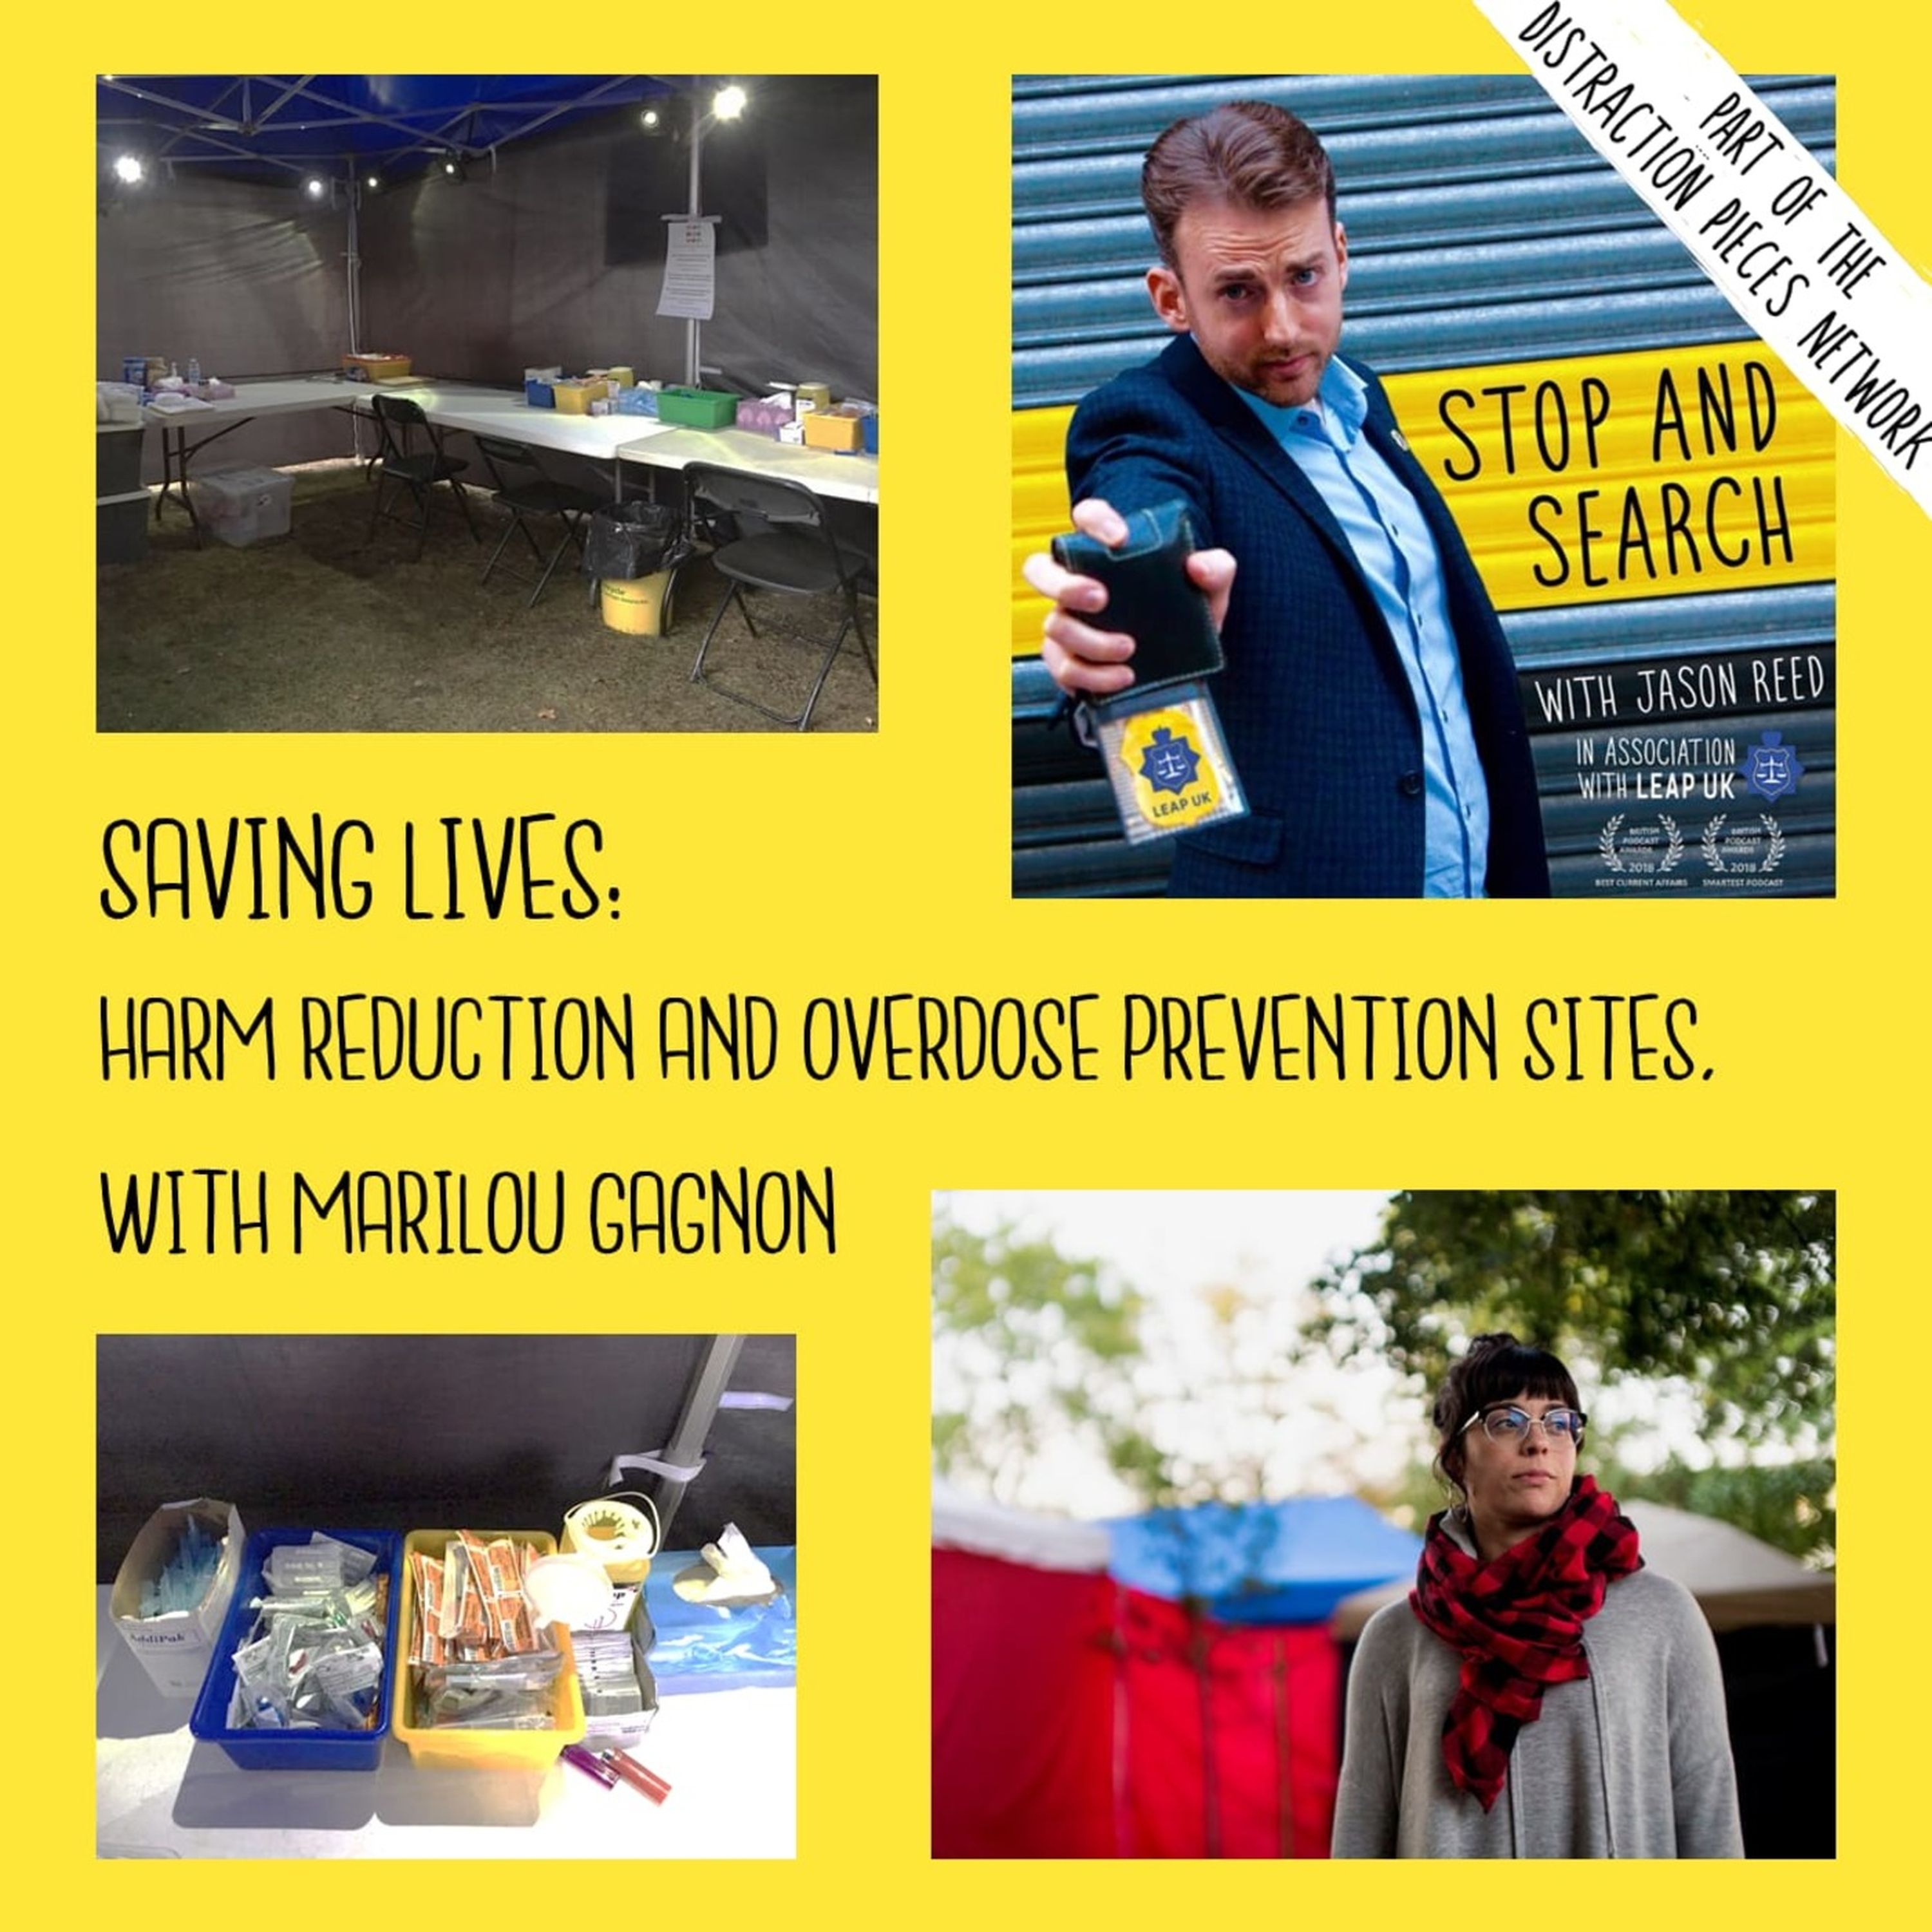 Saving Lives: Harm Reduction & Overdose Prevention Sites with Marilou Gagnon